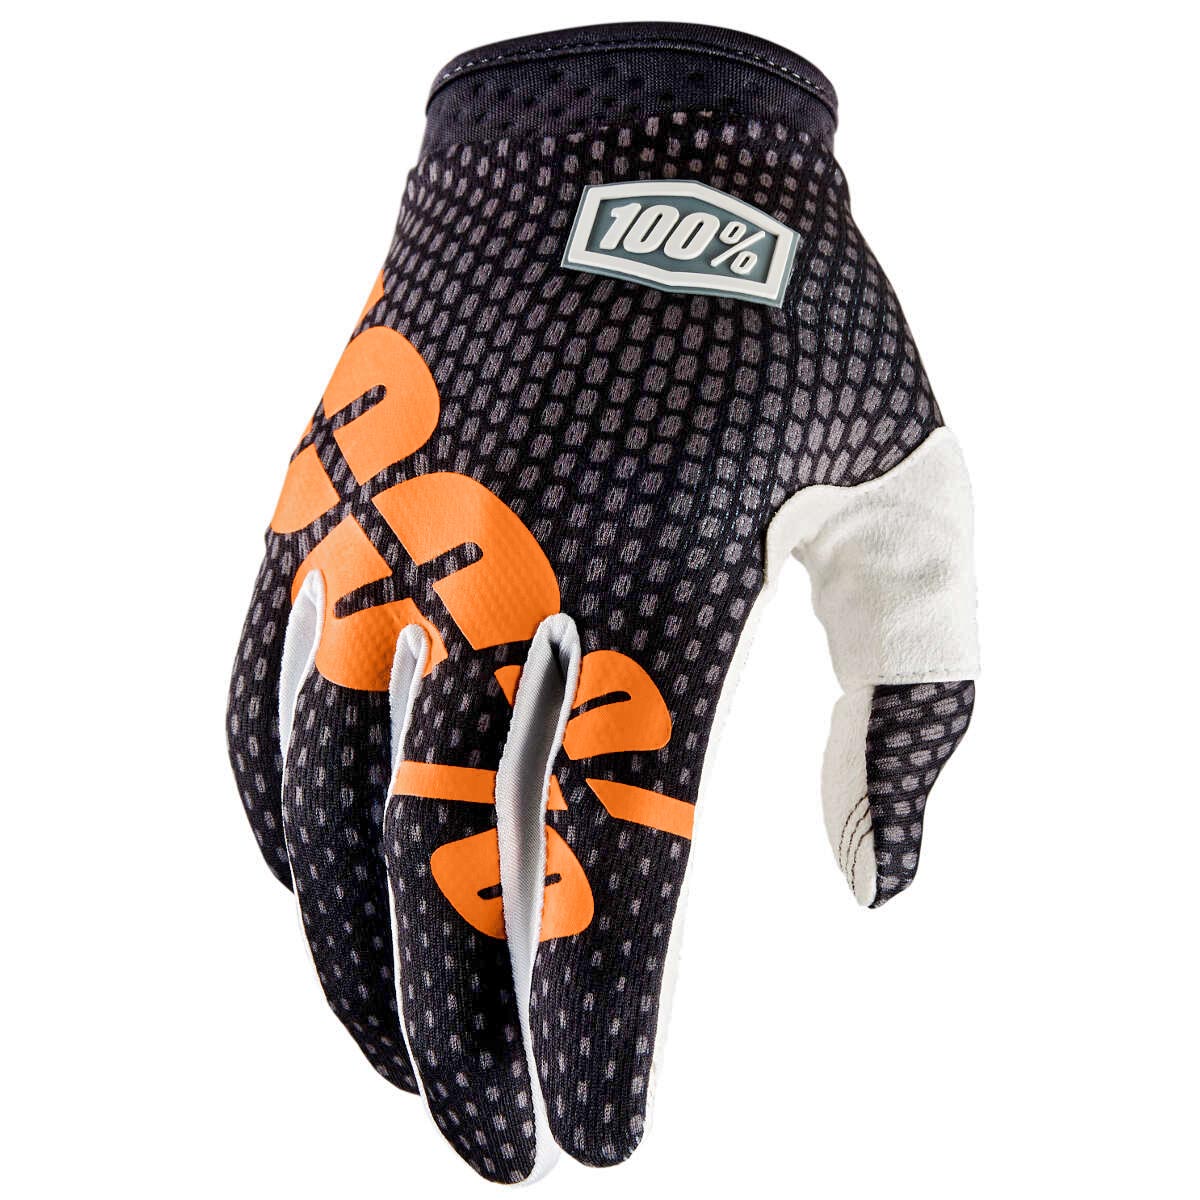 100% Gloves iTrack Charcoal